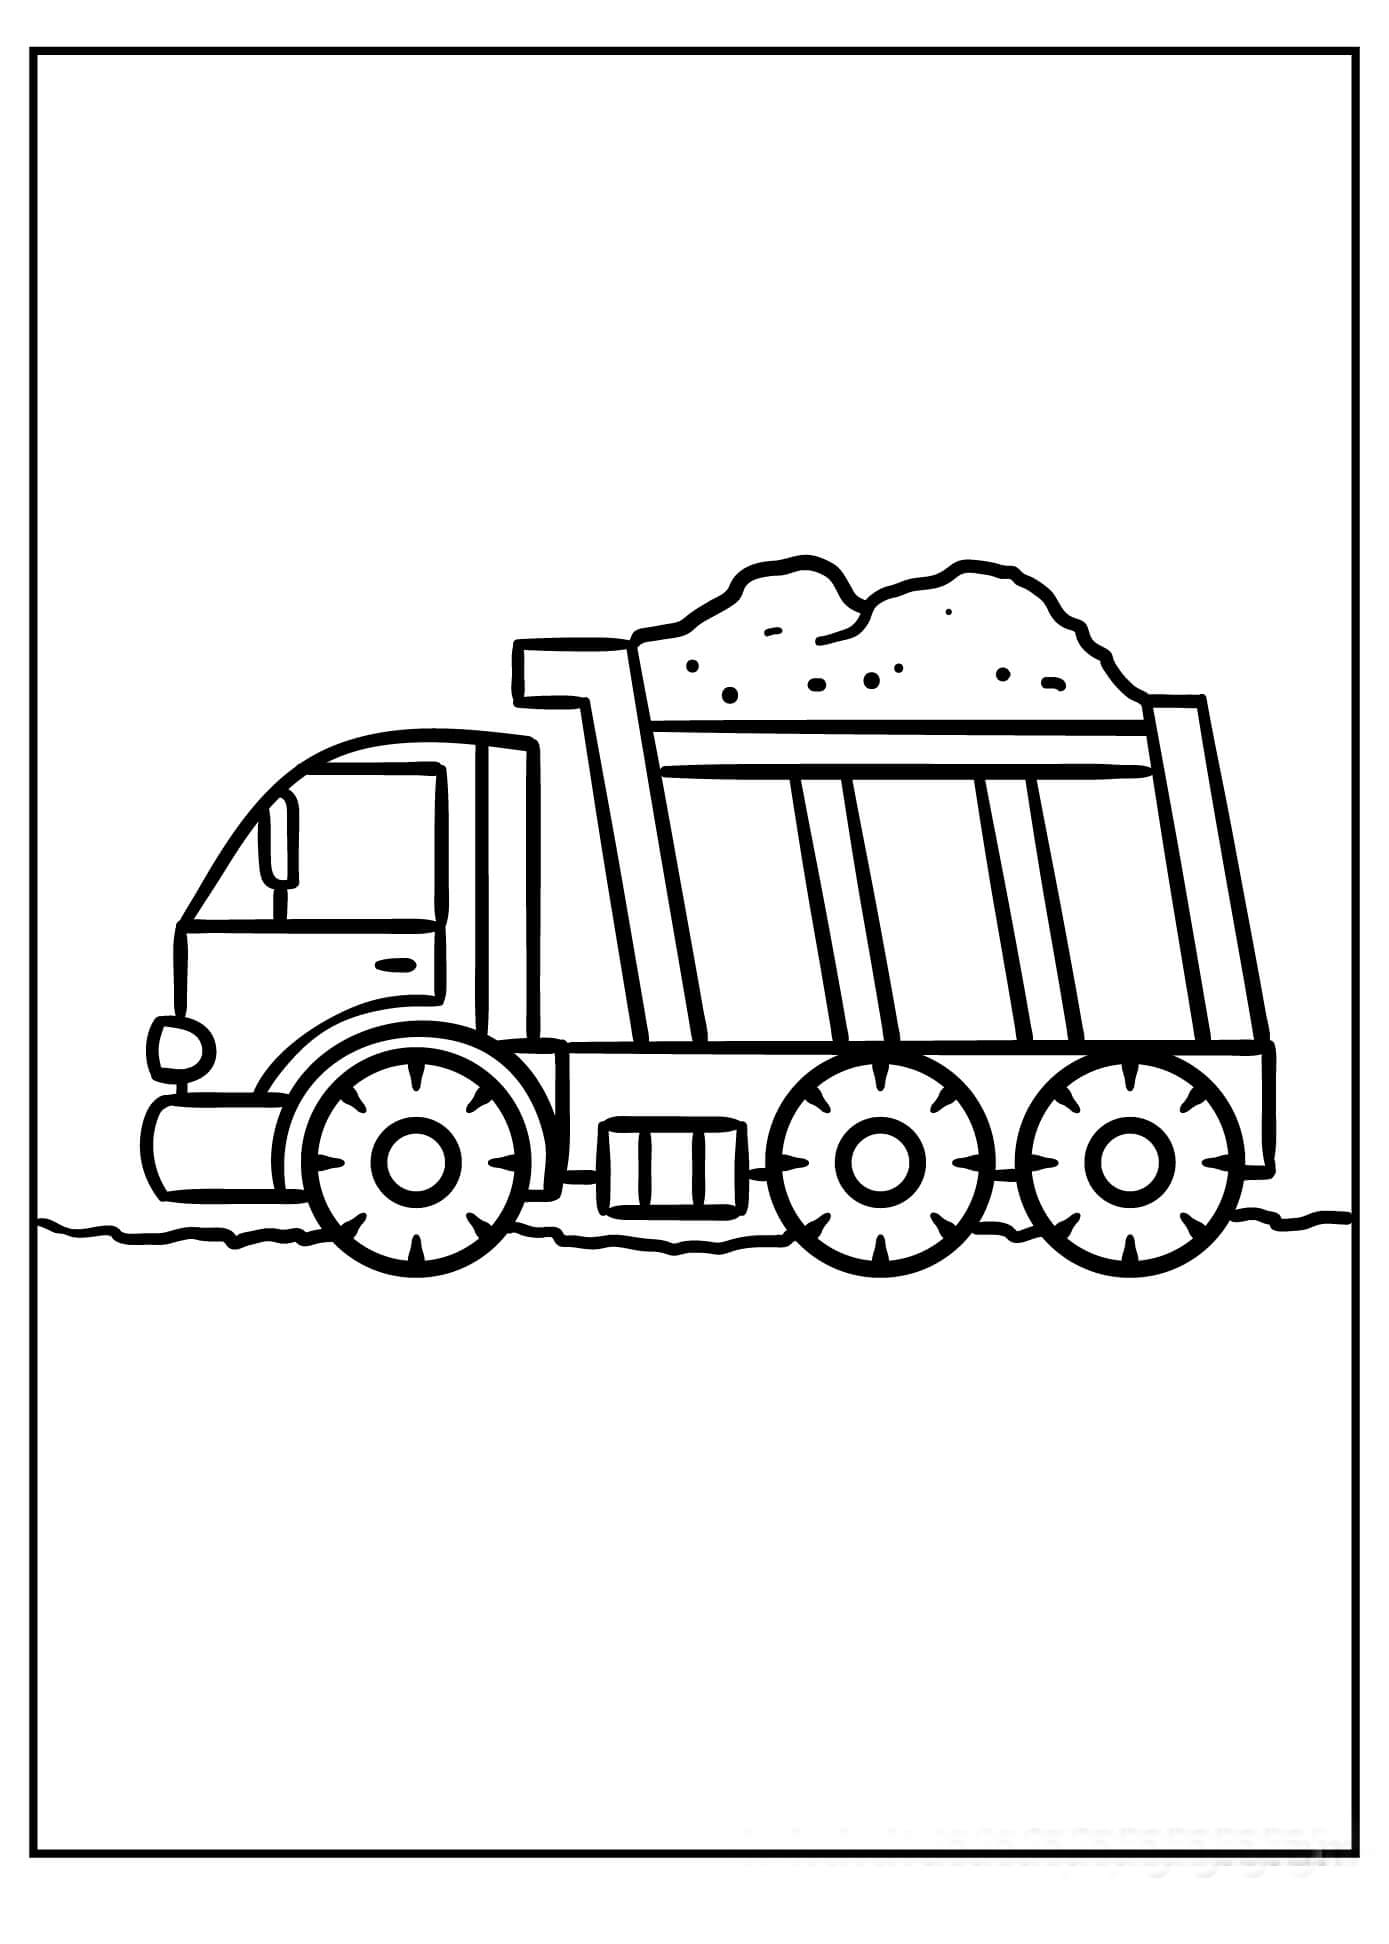 Camion 1 coloring page